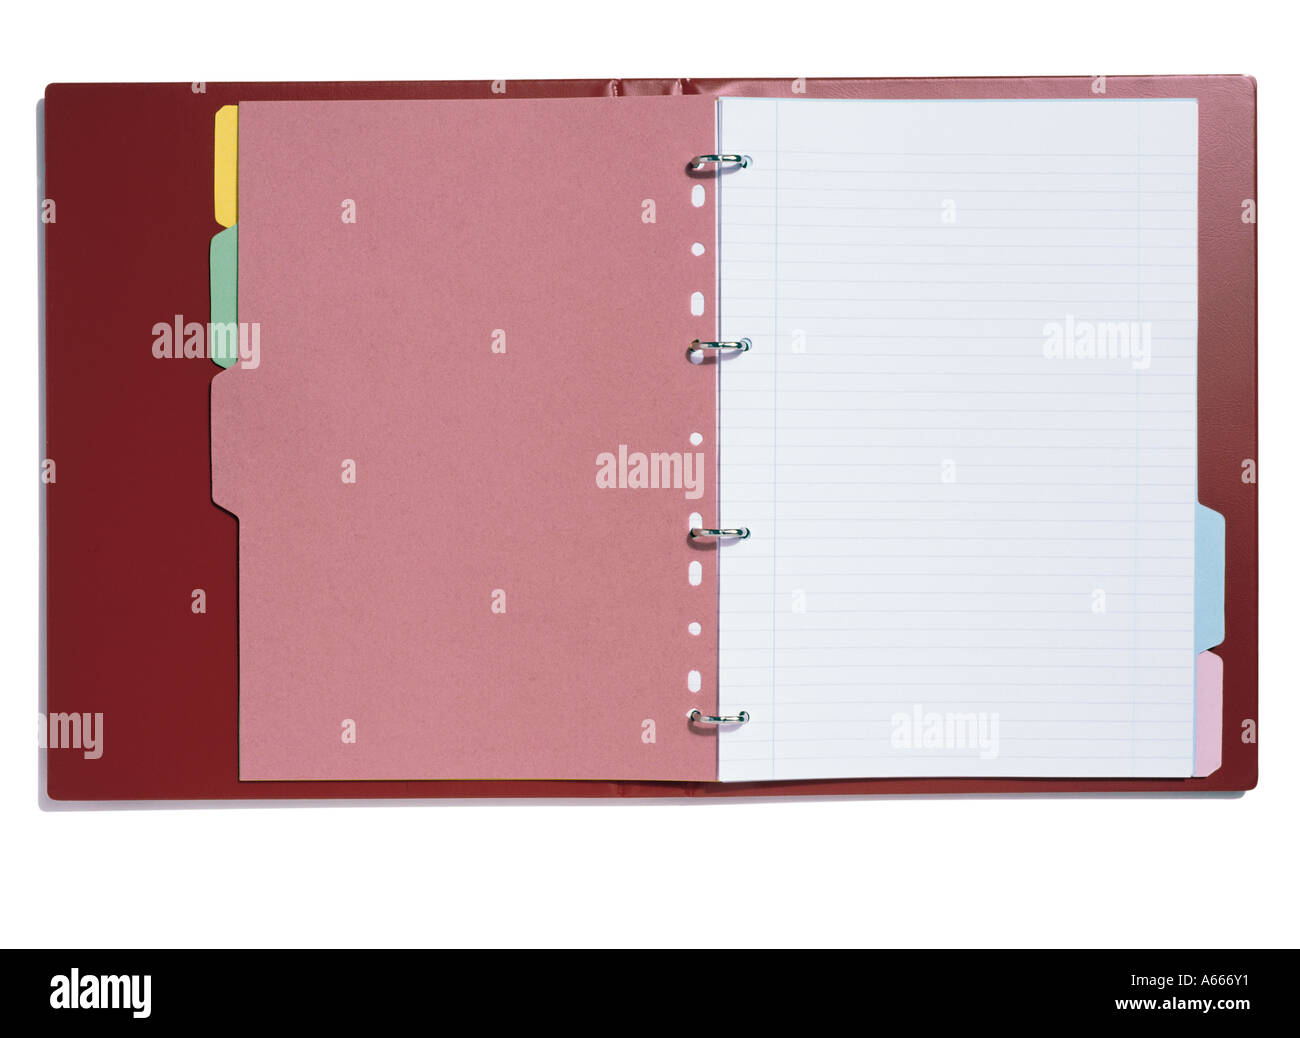 An open red file containing dividers and lined paper Stock Photo